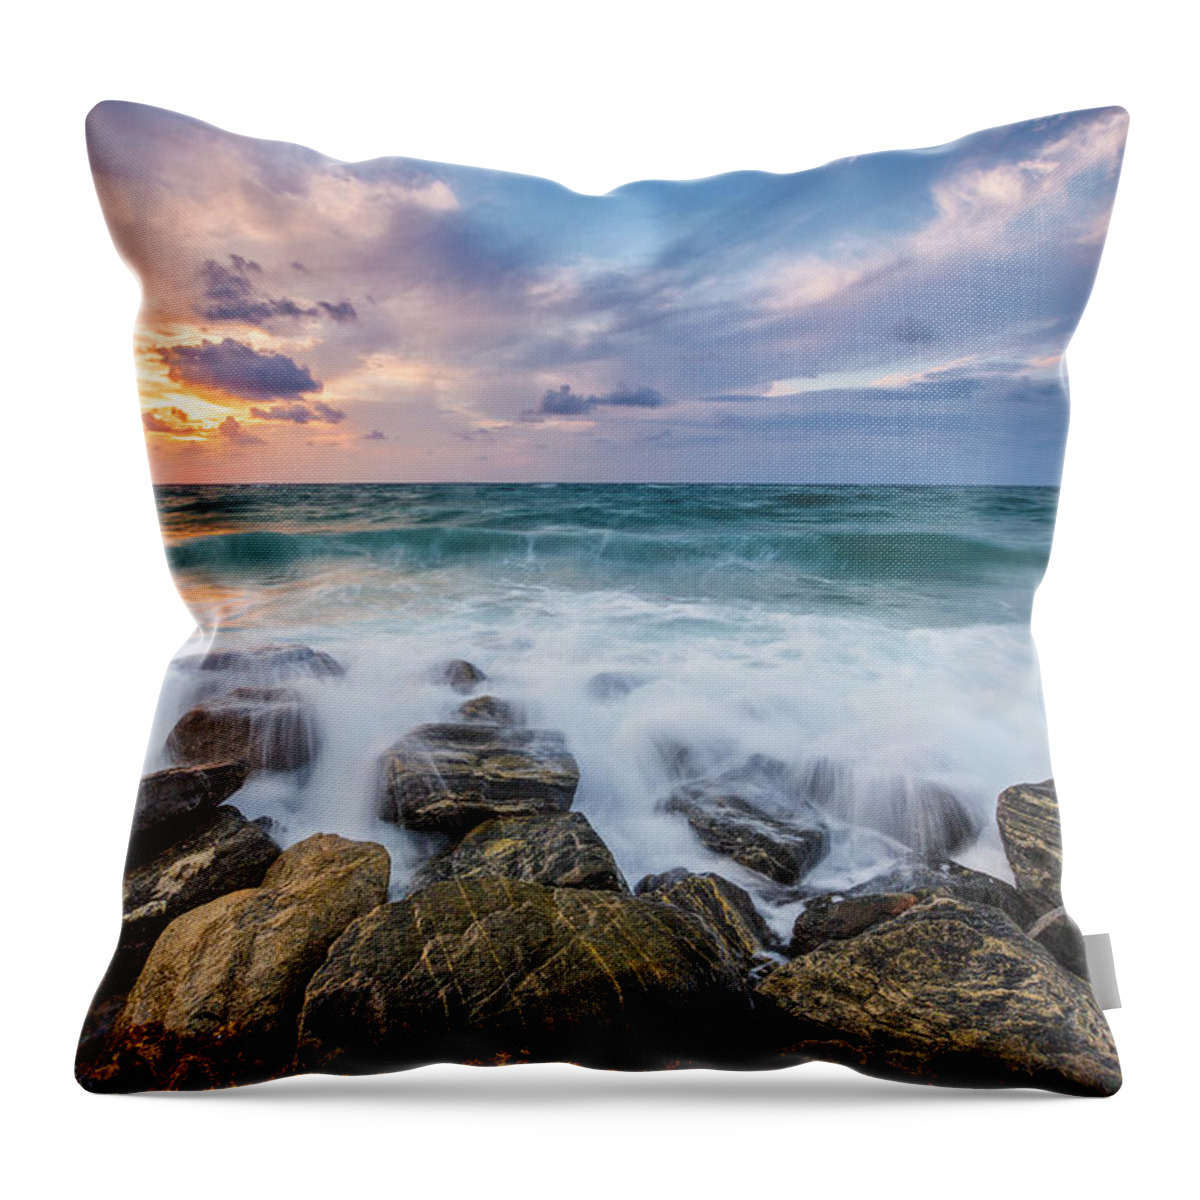 Acrylic Throw Pillow featuring the photograph Intoxicating by Jon Glaser